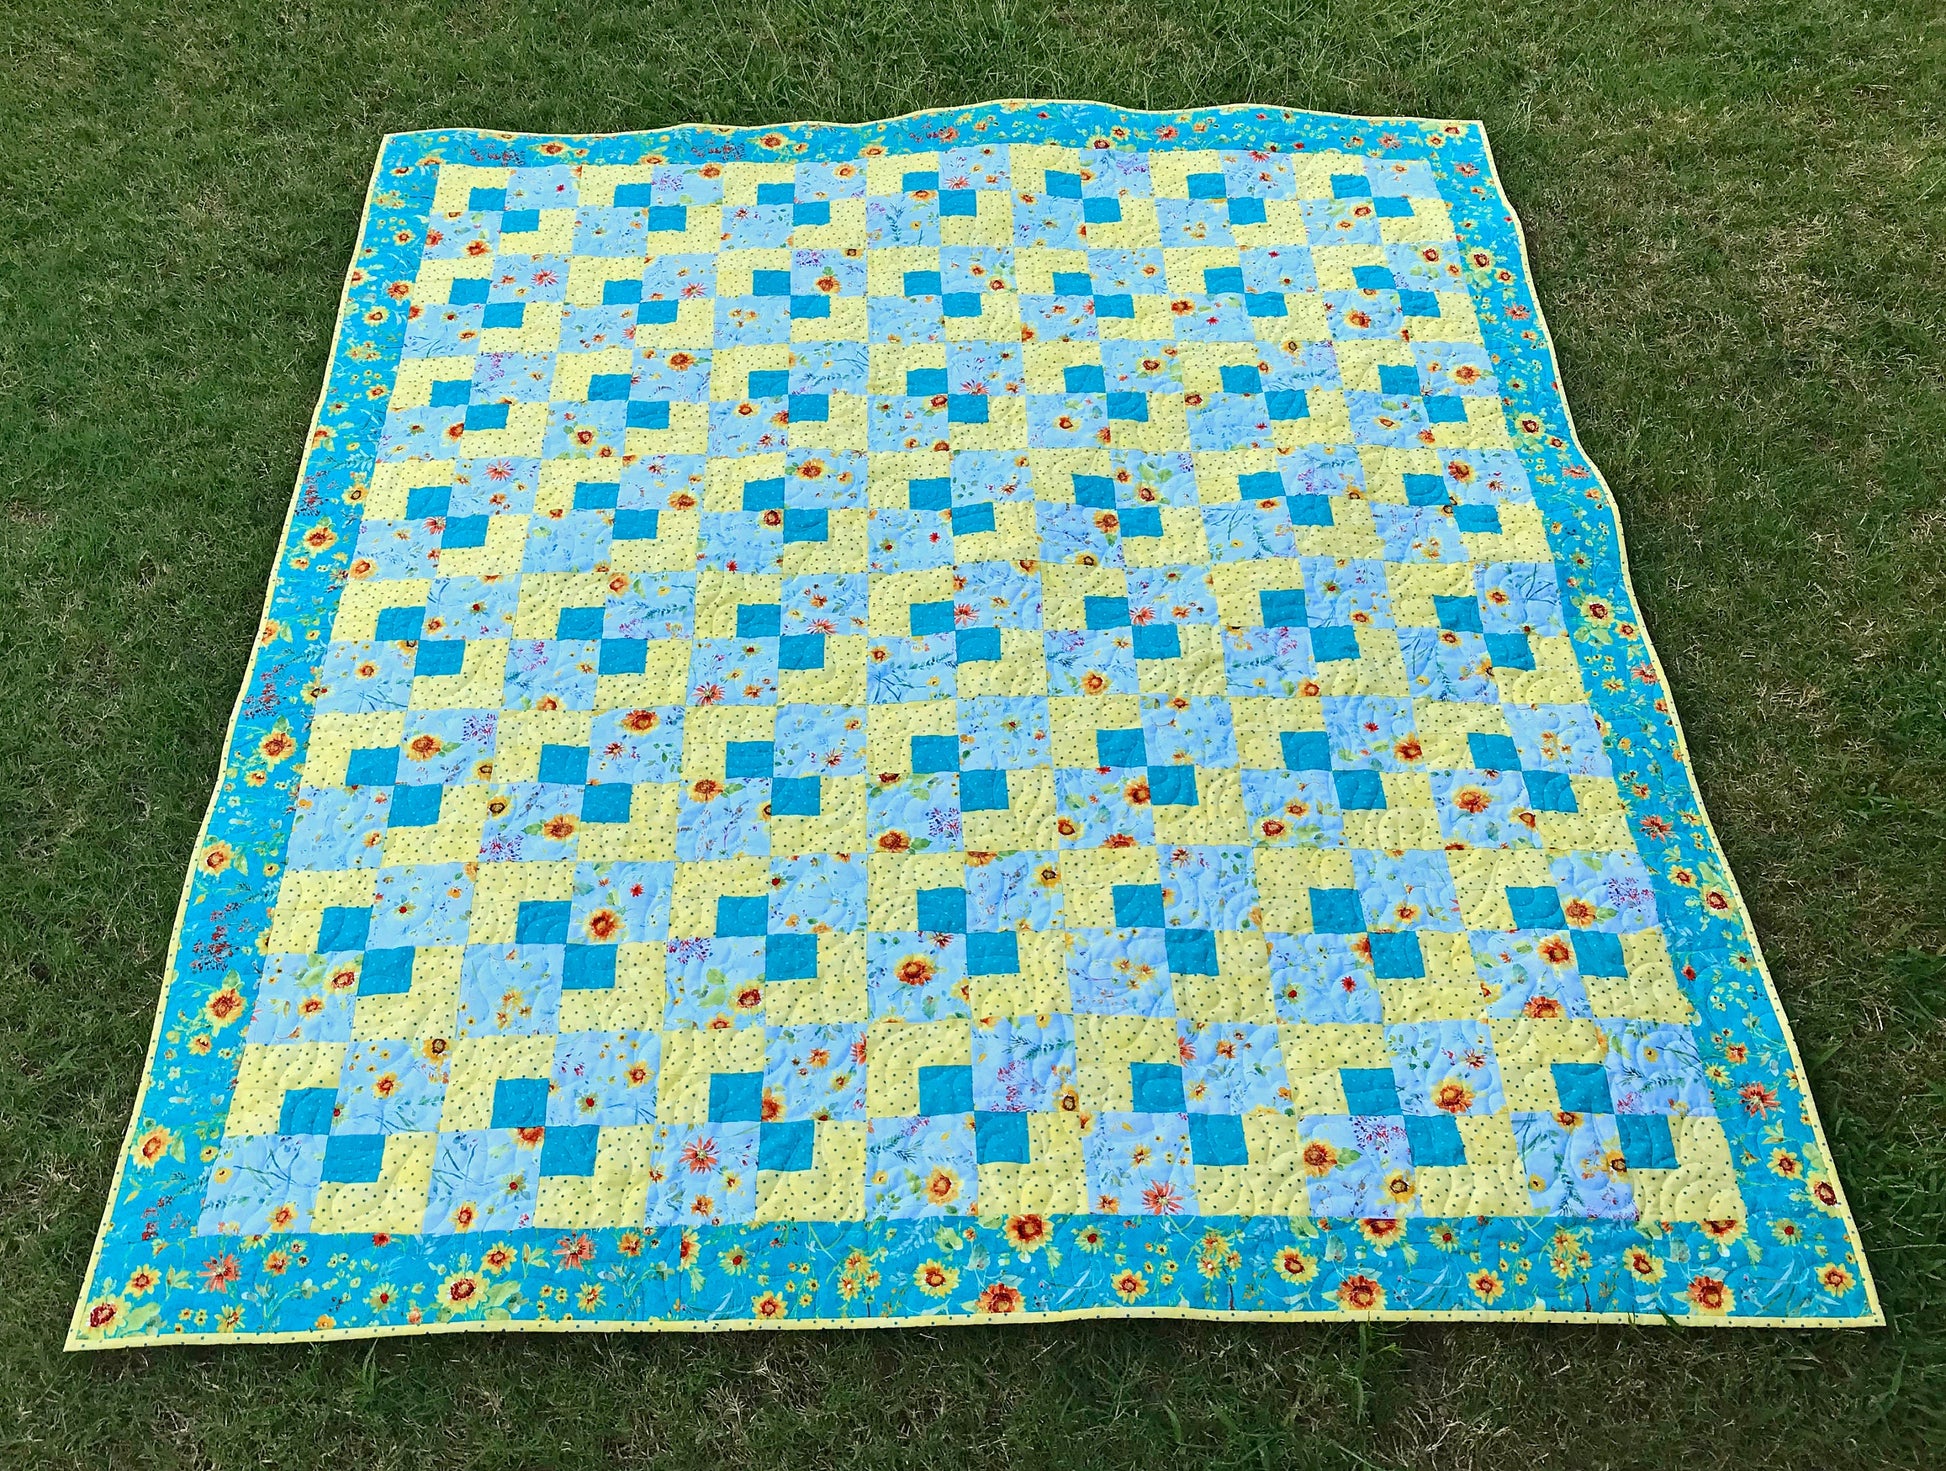 Cornerstones quilt pattern sample quilt. Four patch quilt in yellow and teal floral fabrics displayed laying on a lawn.